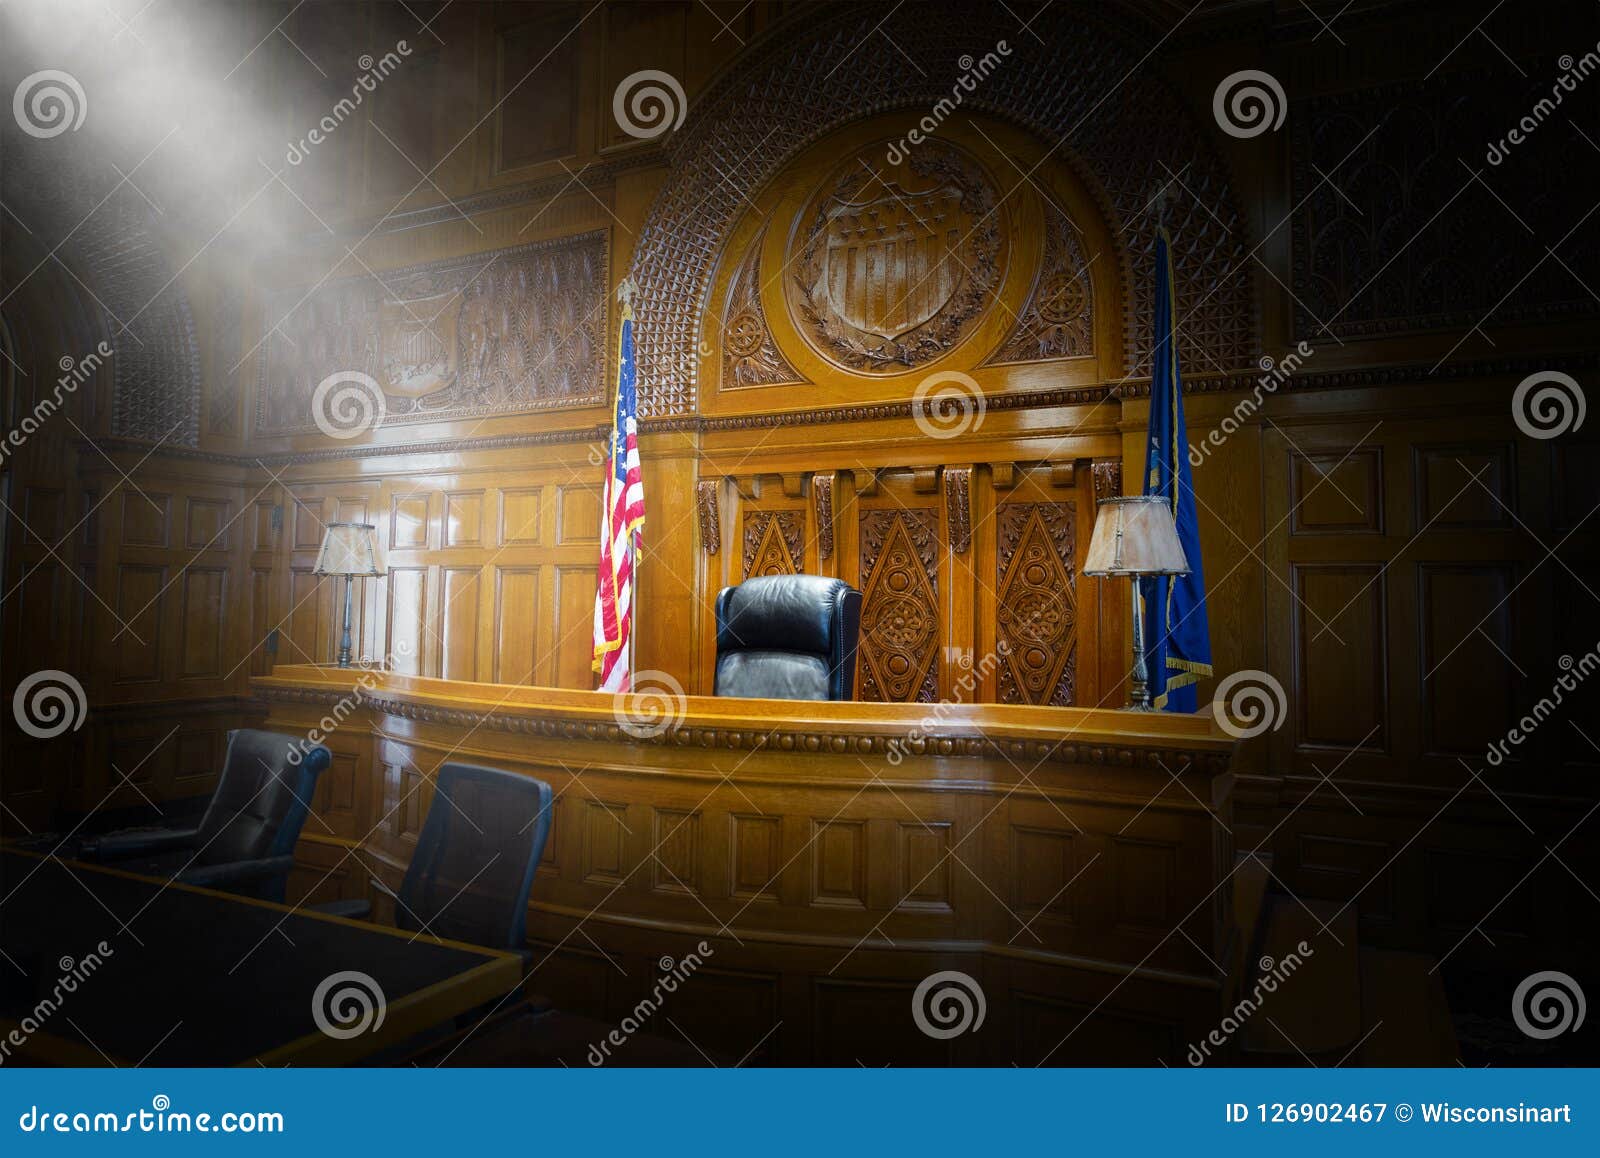 law, court, courtroom, judge, chair, bench